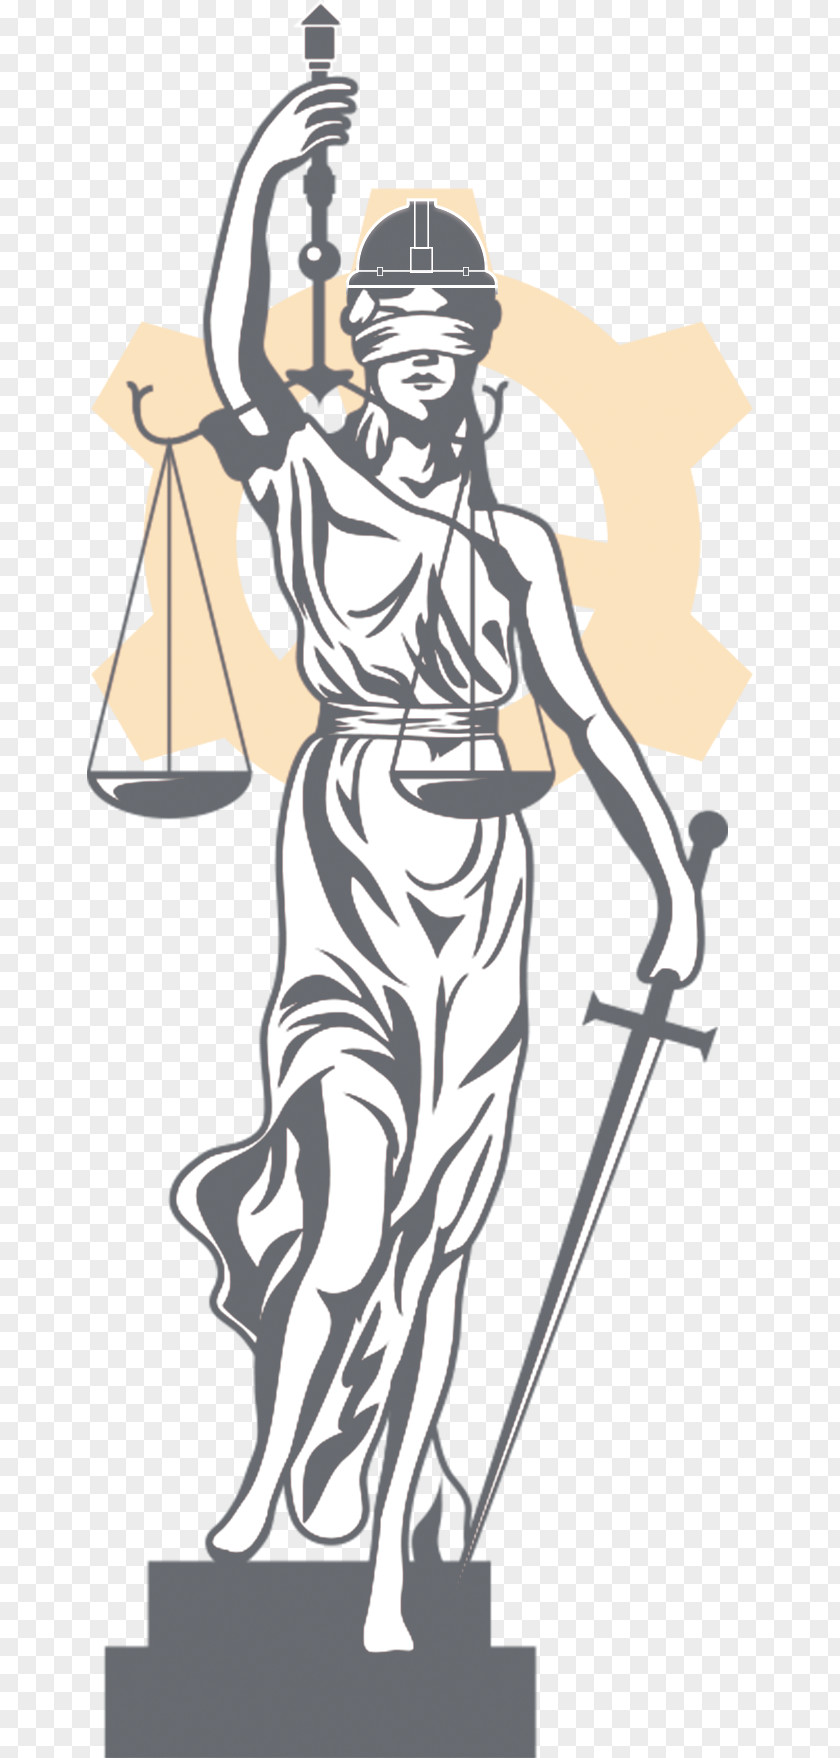 First Sunday Of Lent Justice Lady Lawyer Image Clip Art PNG